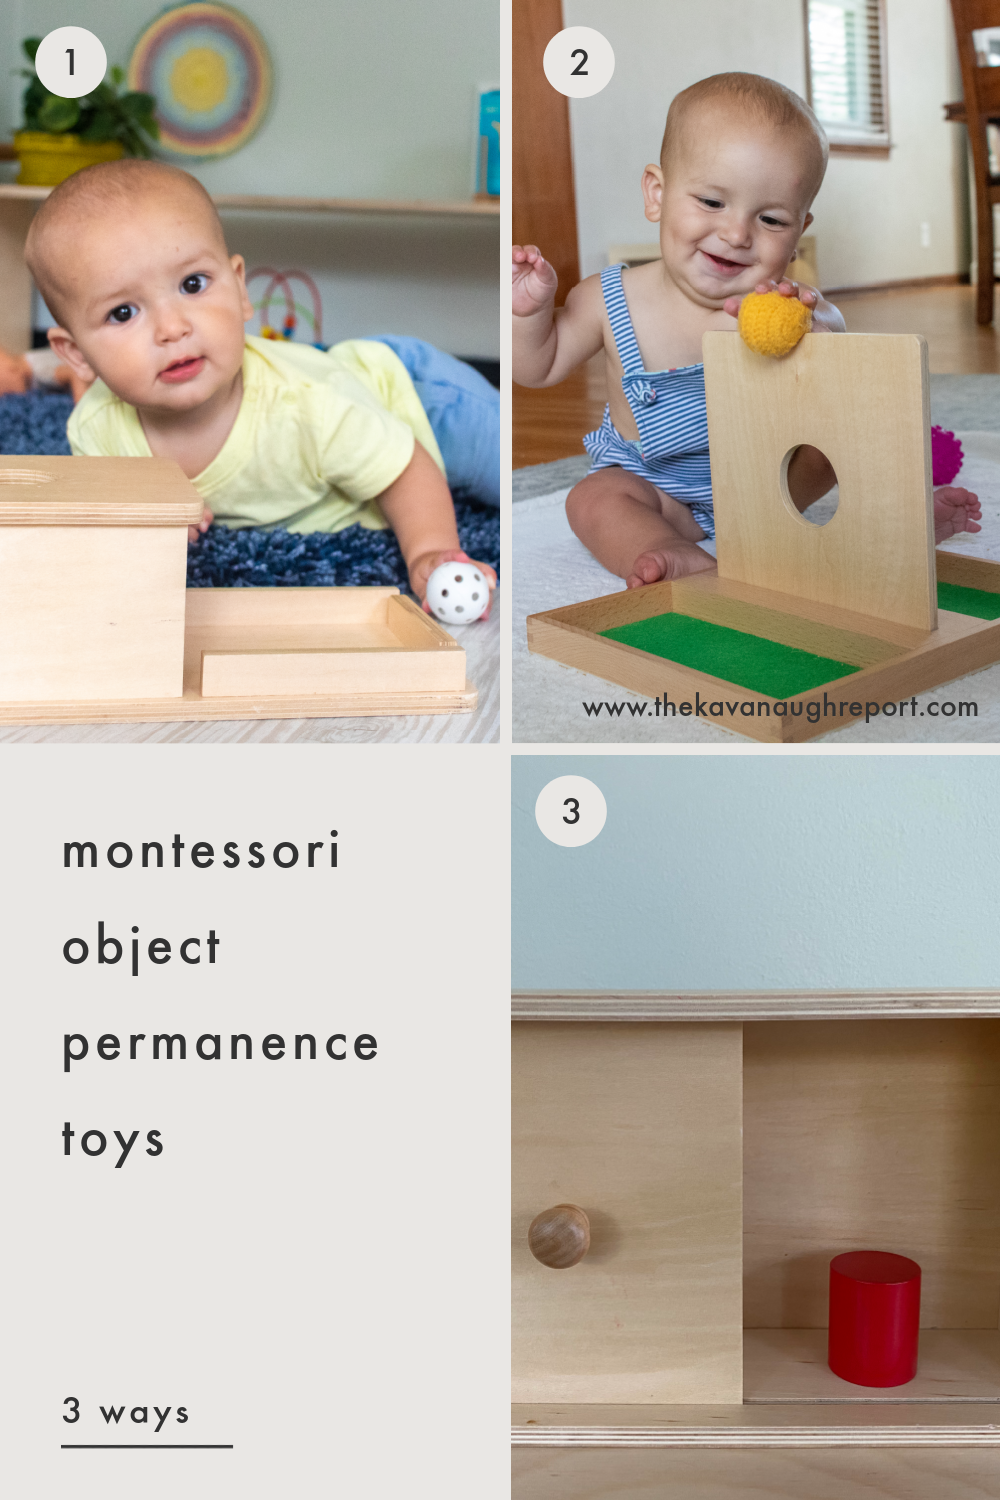 When Does Baby Develop Object Permanence?